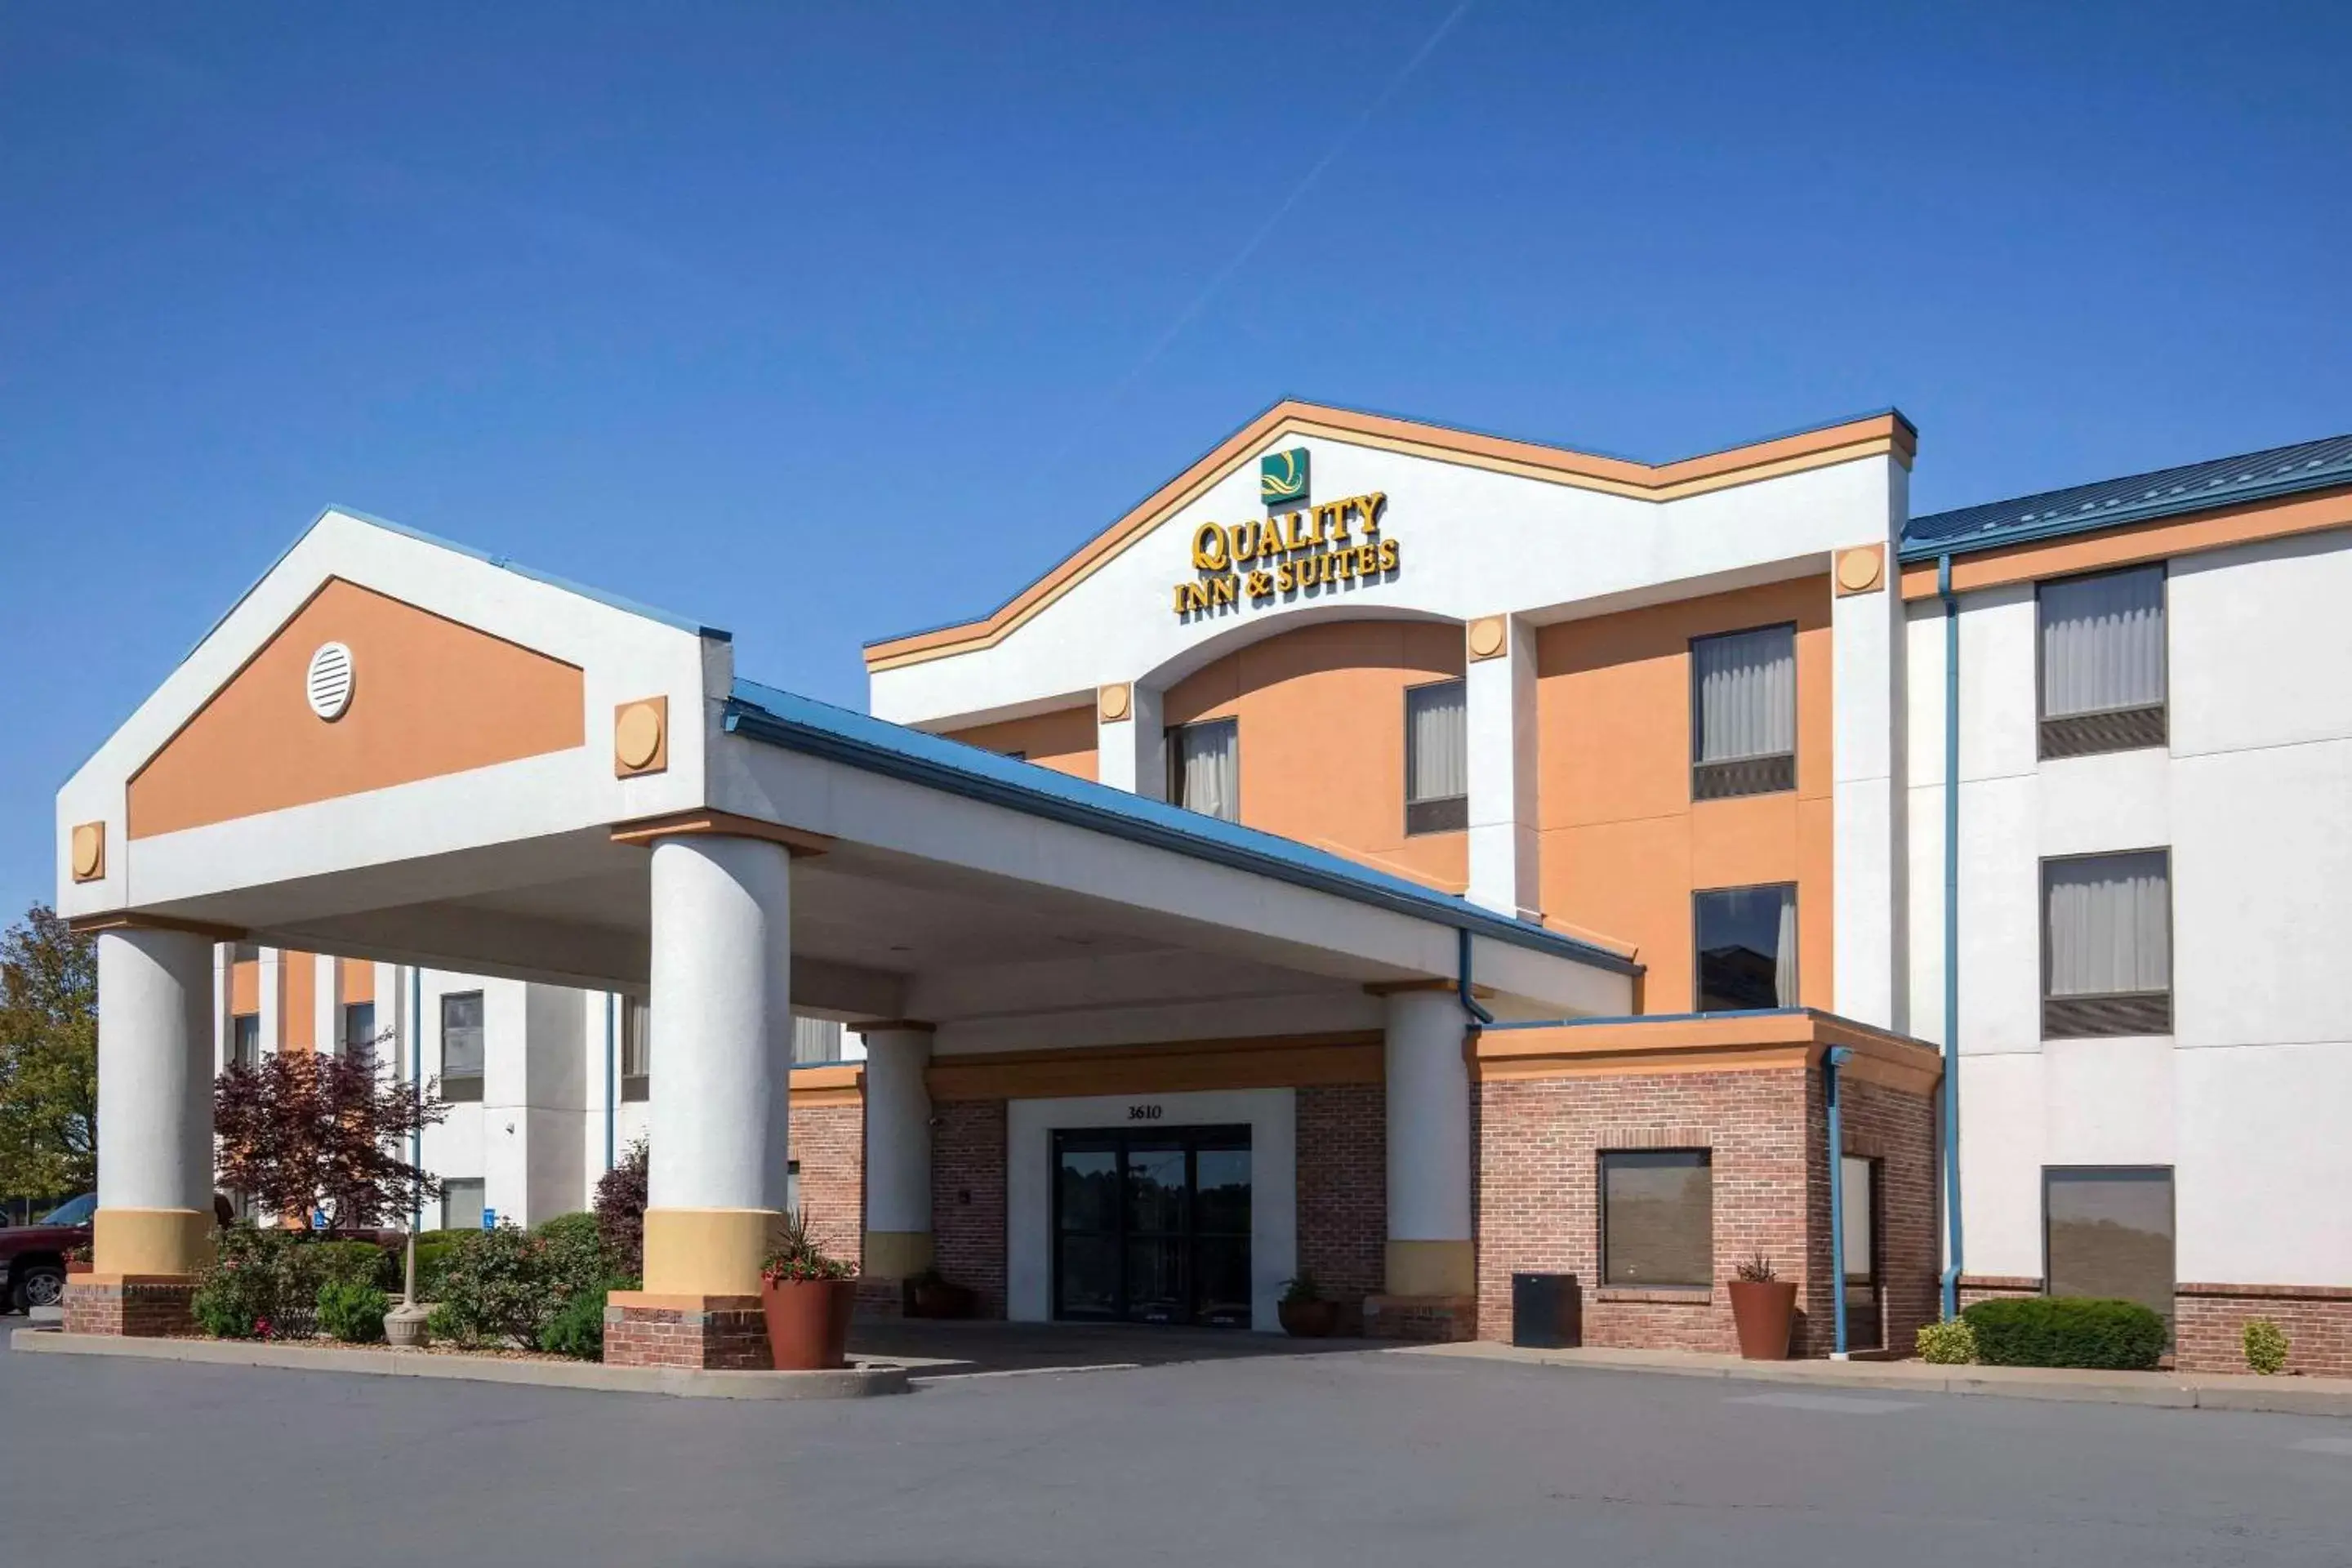 Property building in Quality Inn & Suites Arnold